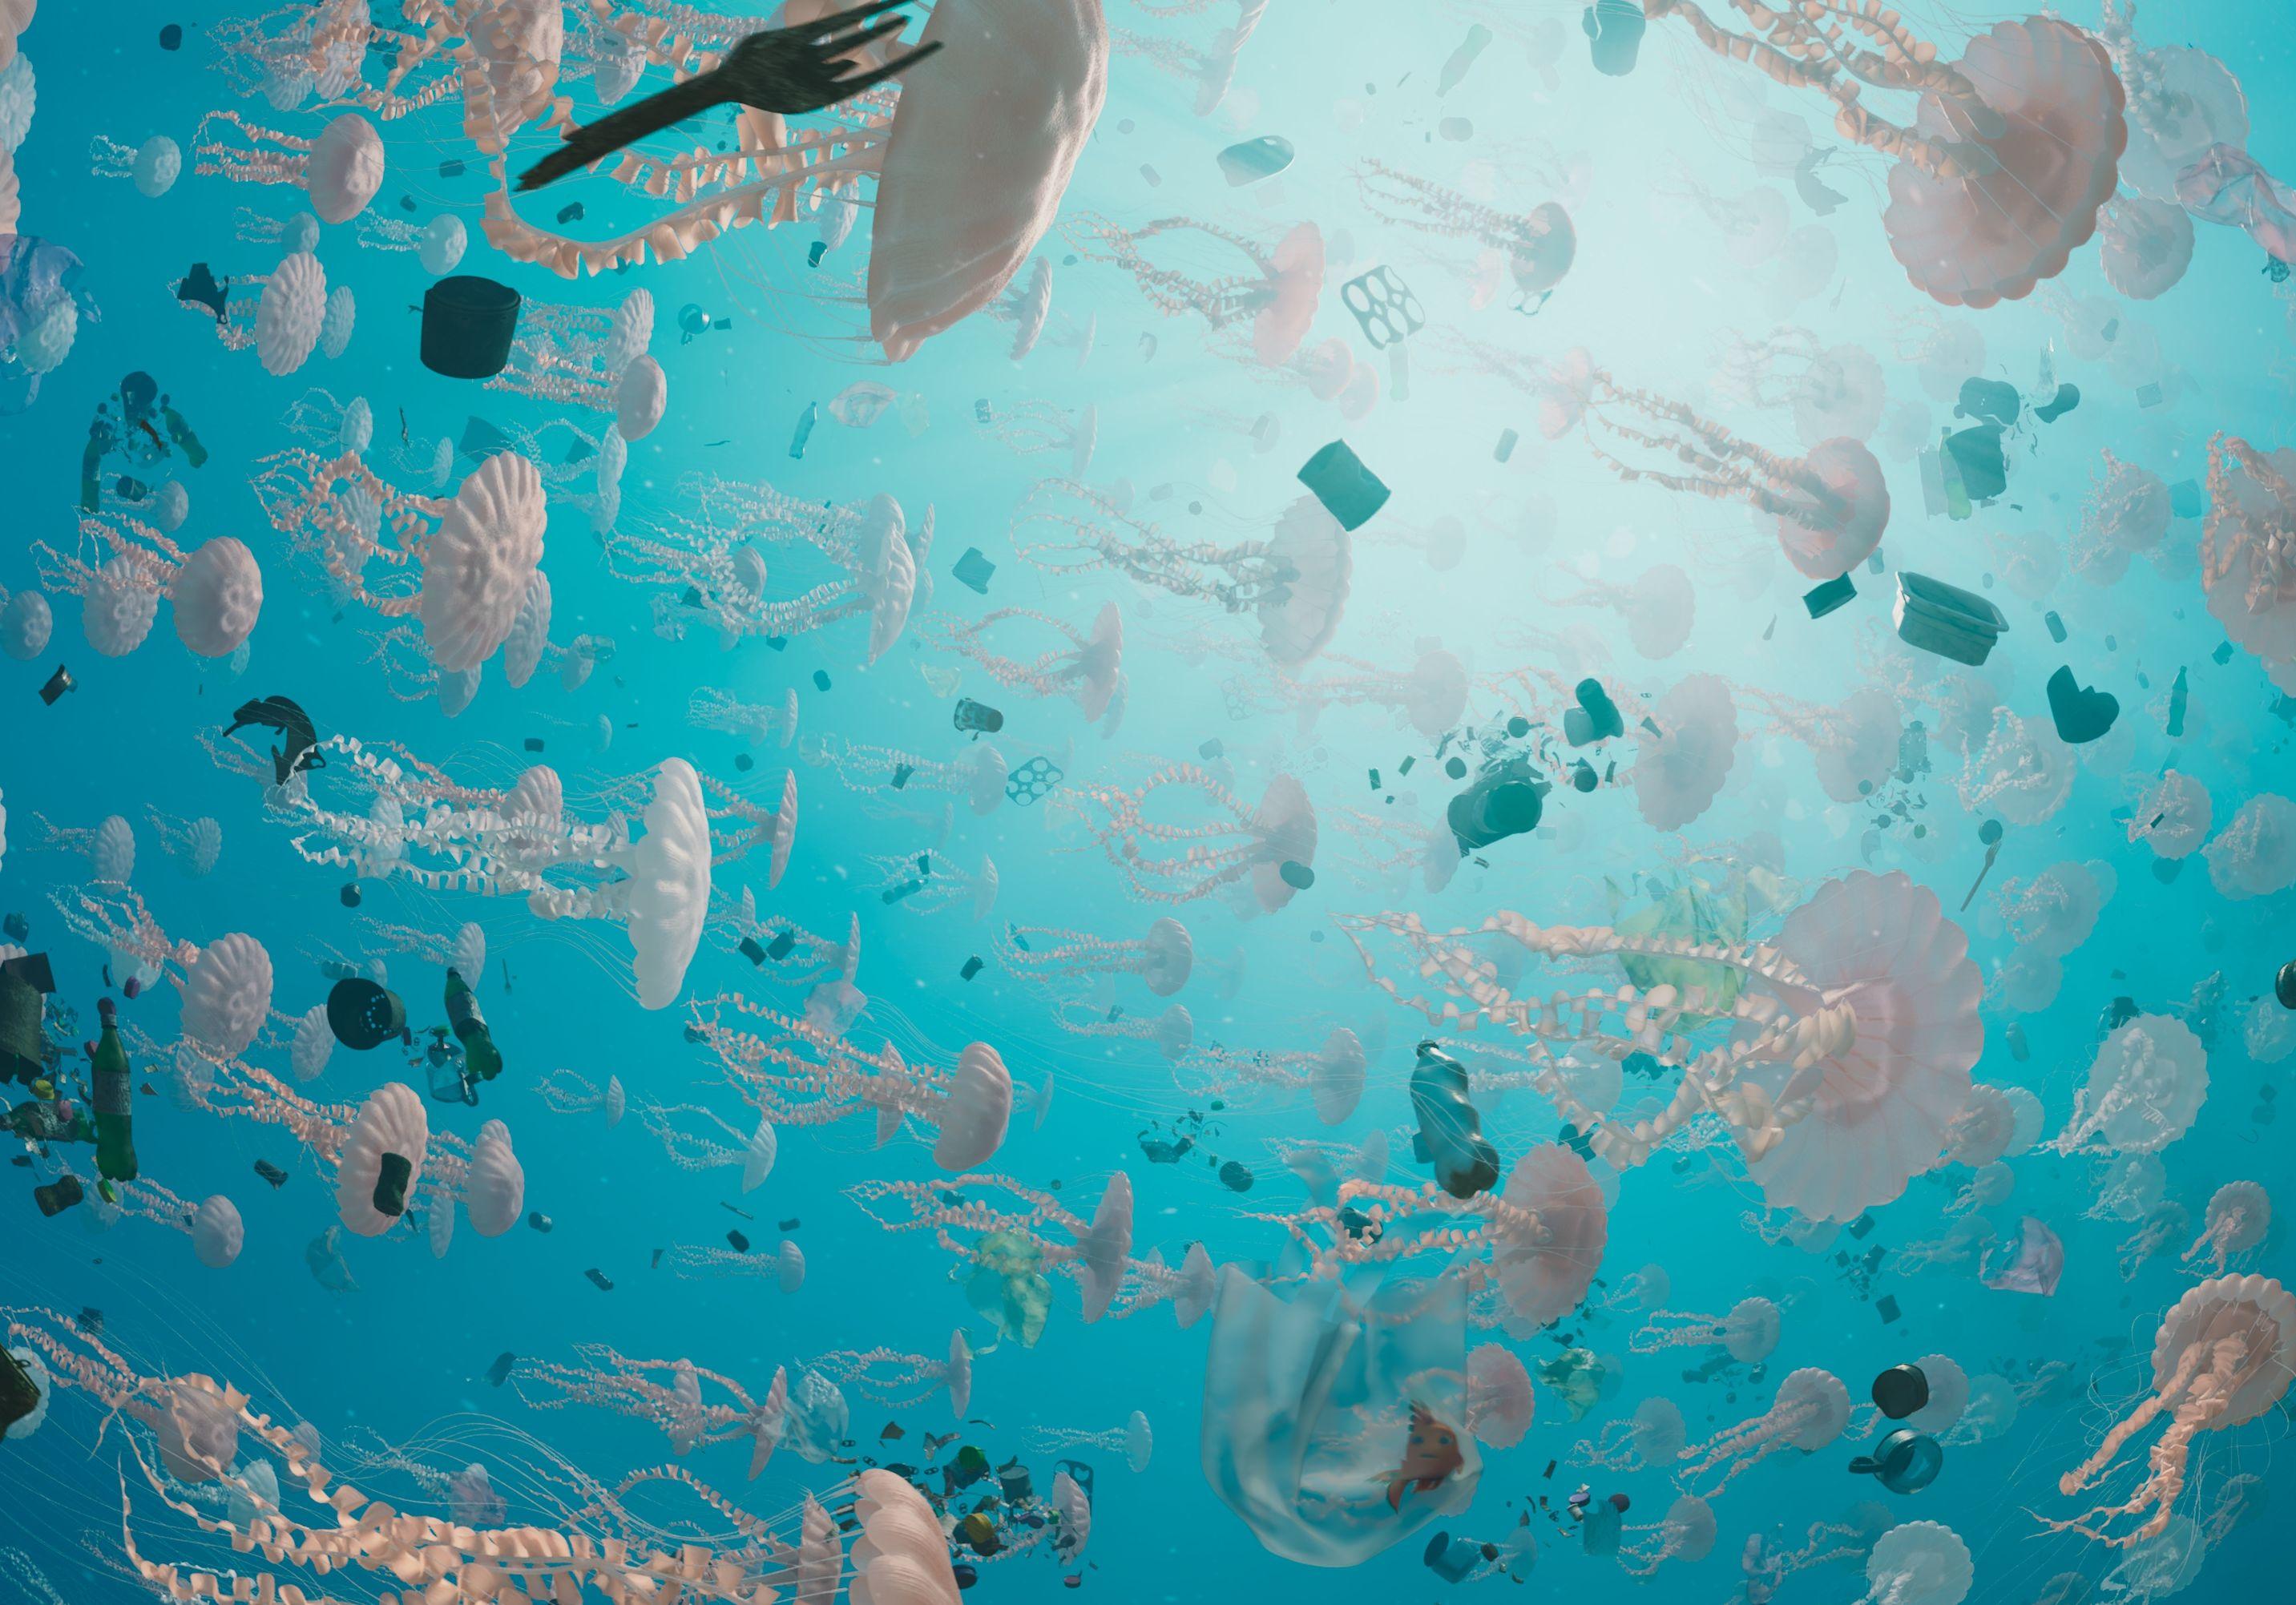 The Hong Kong Space Museum will screen a new 3D dome show, "Legend of the Enchanted Reef 3D", at its Space Theatre starting October 1 (Sunday) to lead audiences to explore the underwater world. Picture shows a heavily polluted region filled with rubbish that destroys marine ecosystems. (Source of photo: SOFTMACHINE)